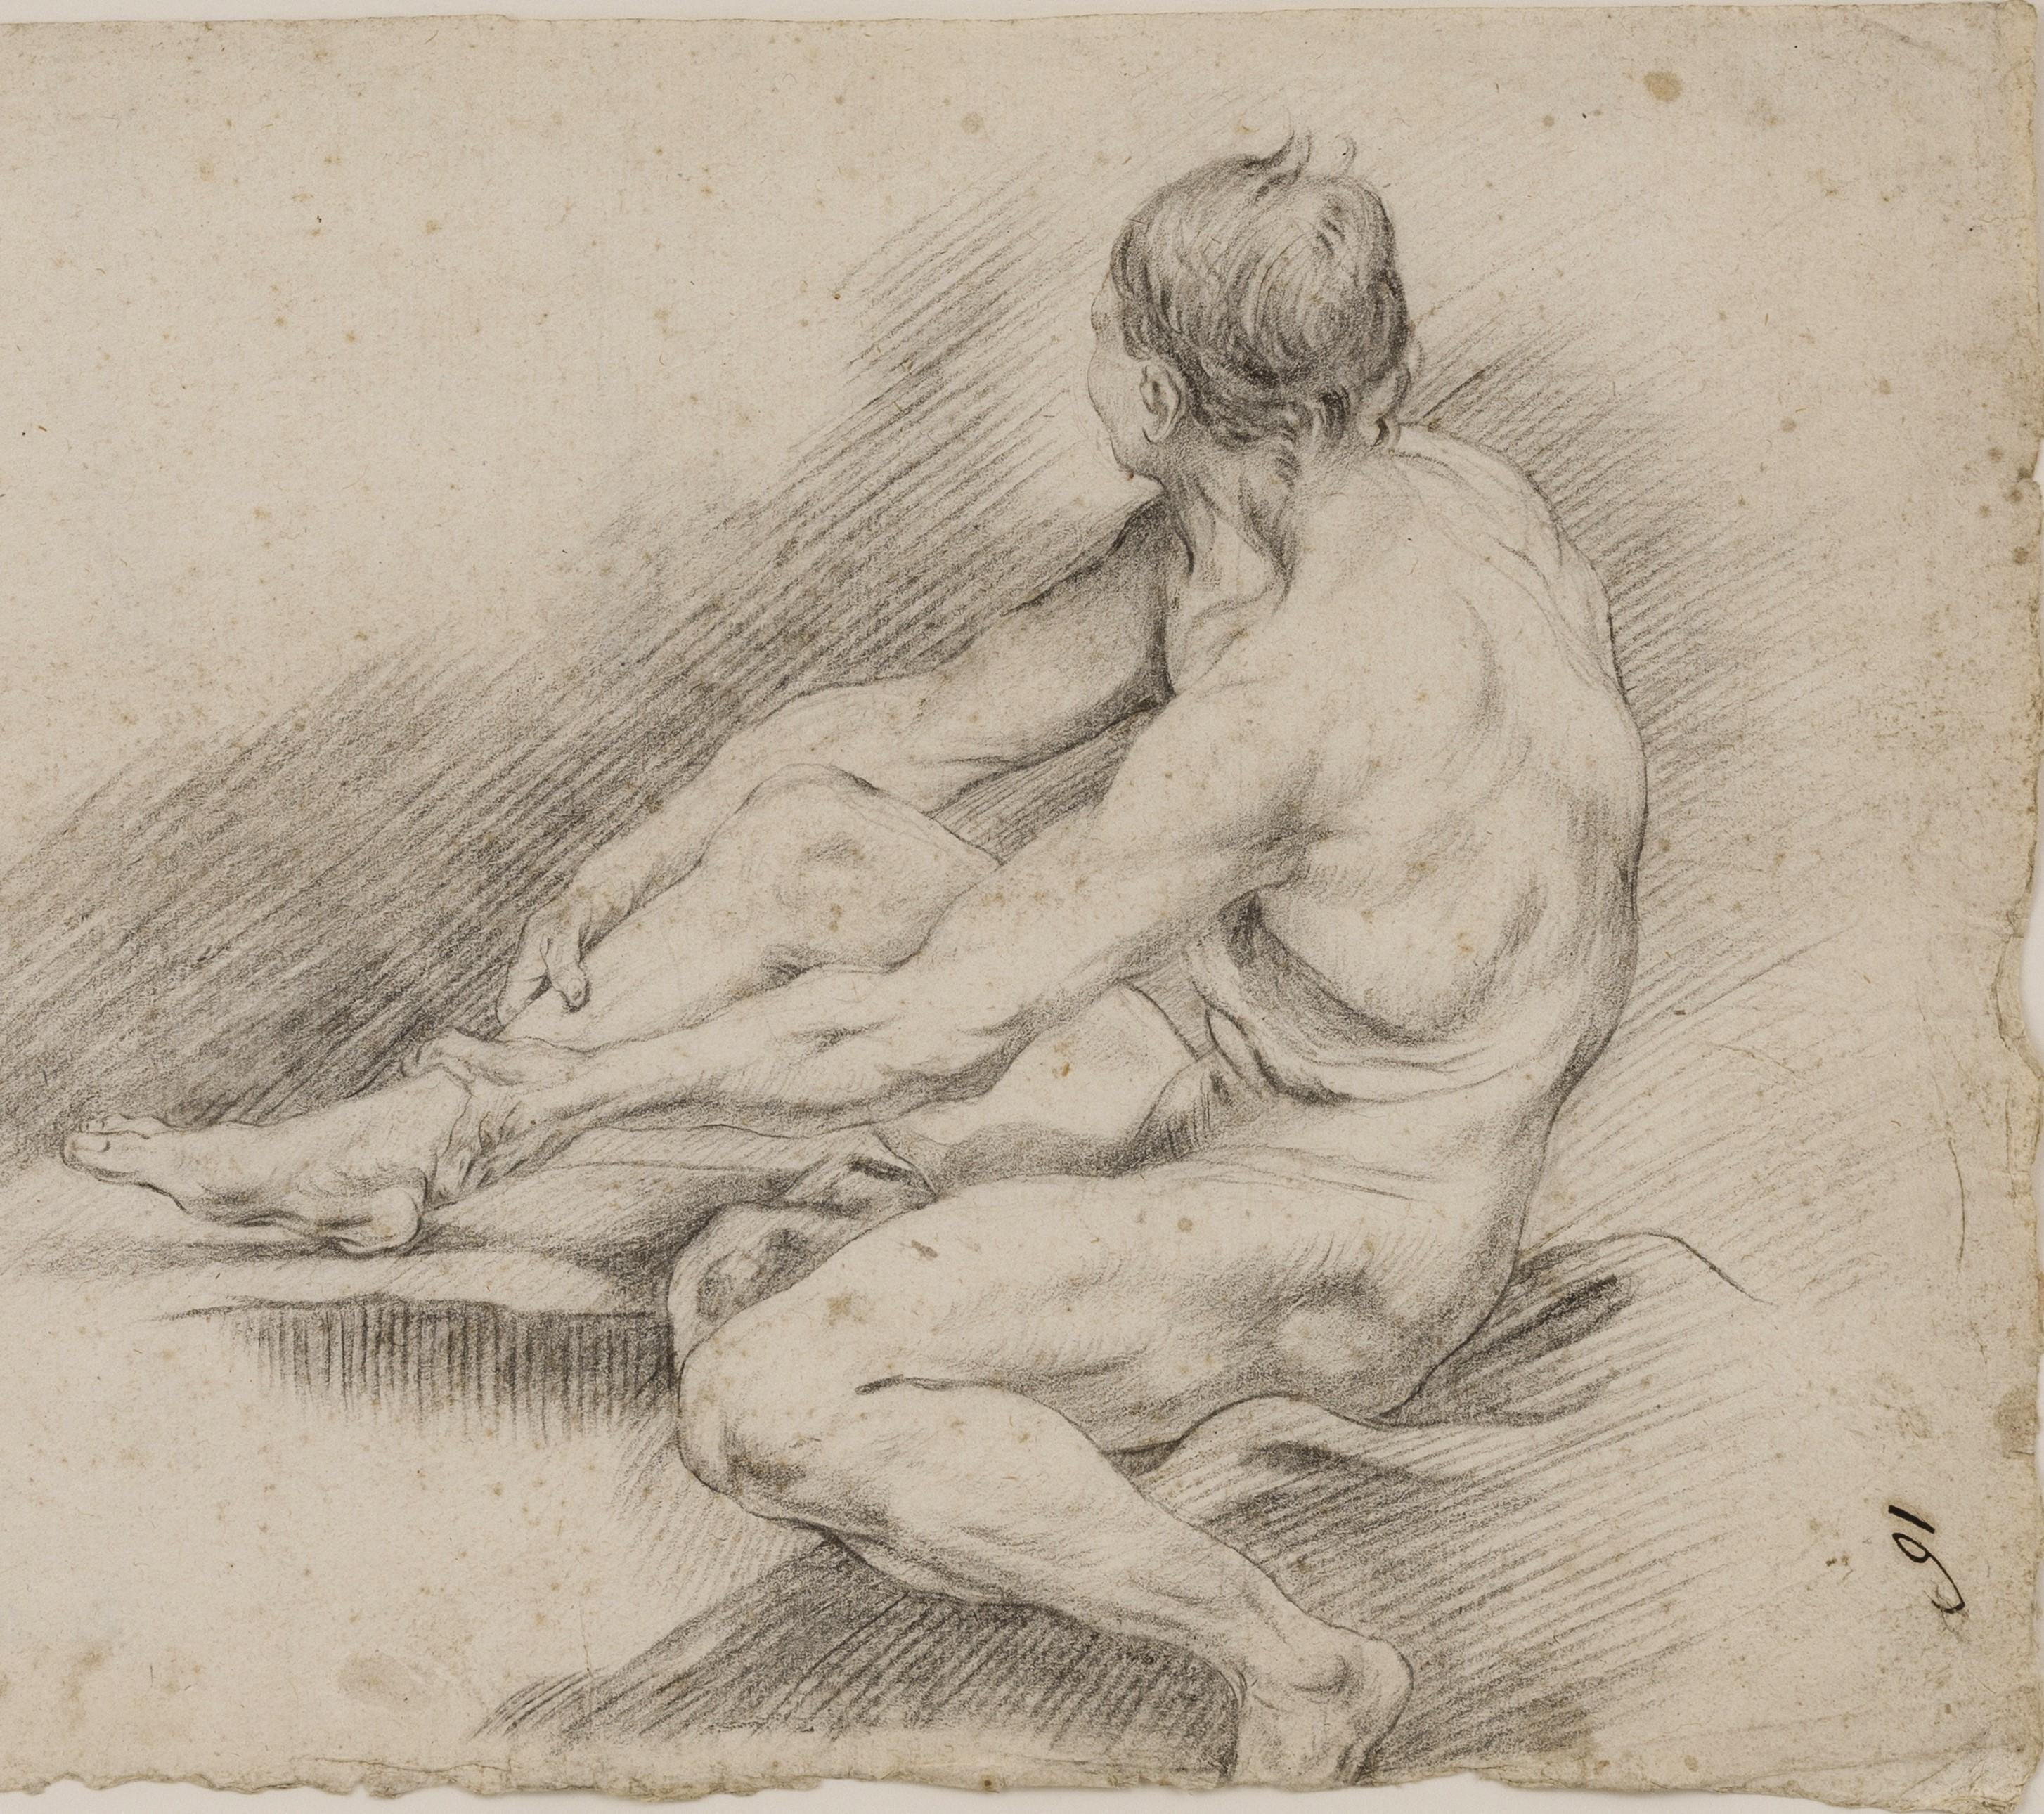 Black chalk on paper, 19cm x 31cm, (35cm x 46cm framed). 

Drawings and paintings of the nude were central to academic art training in Europe from the 16th century onwards. The practice of repeatedly drawing the nude, and particularly the male nude,